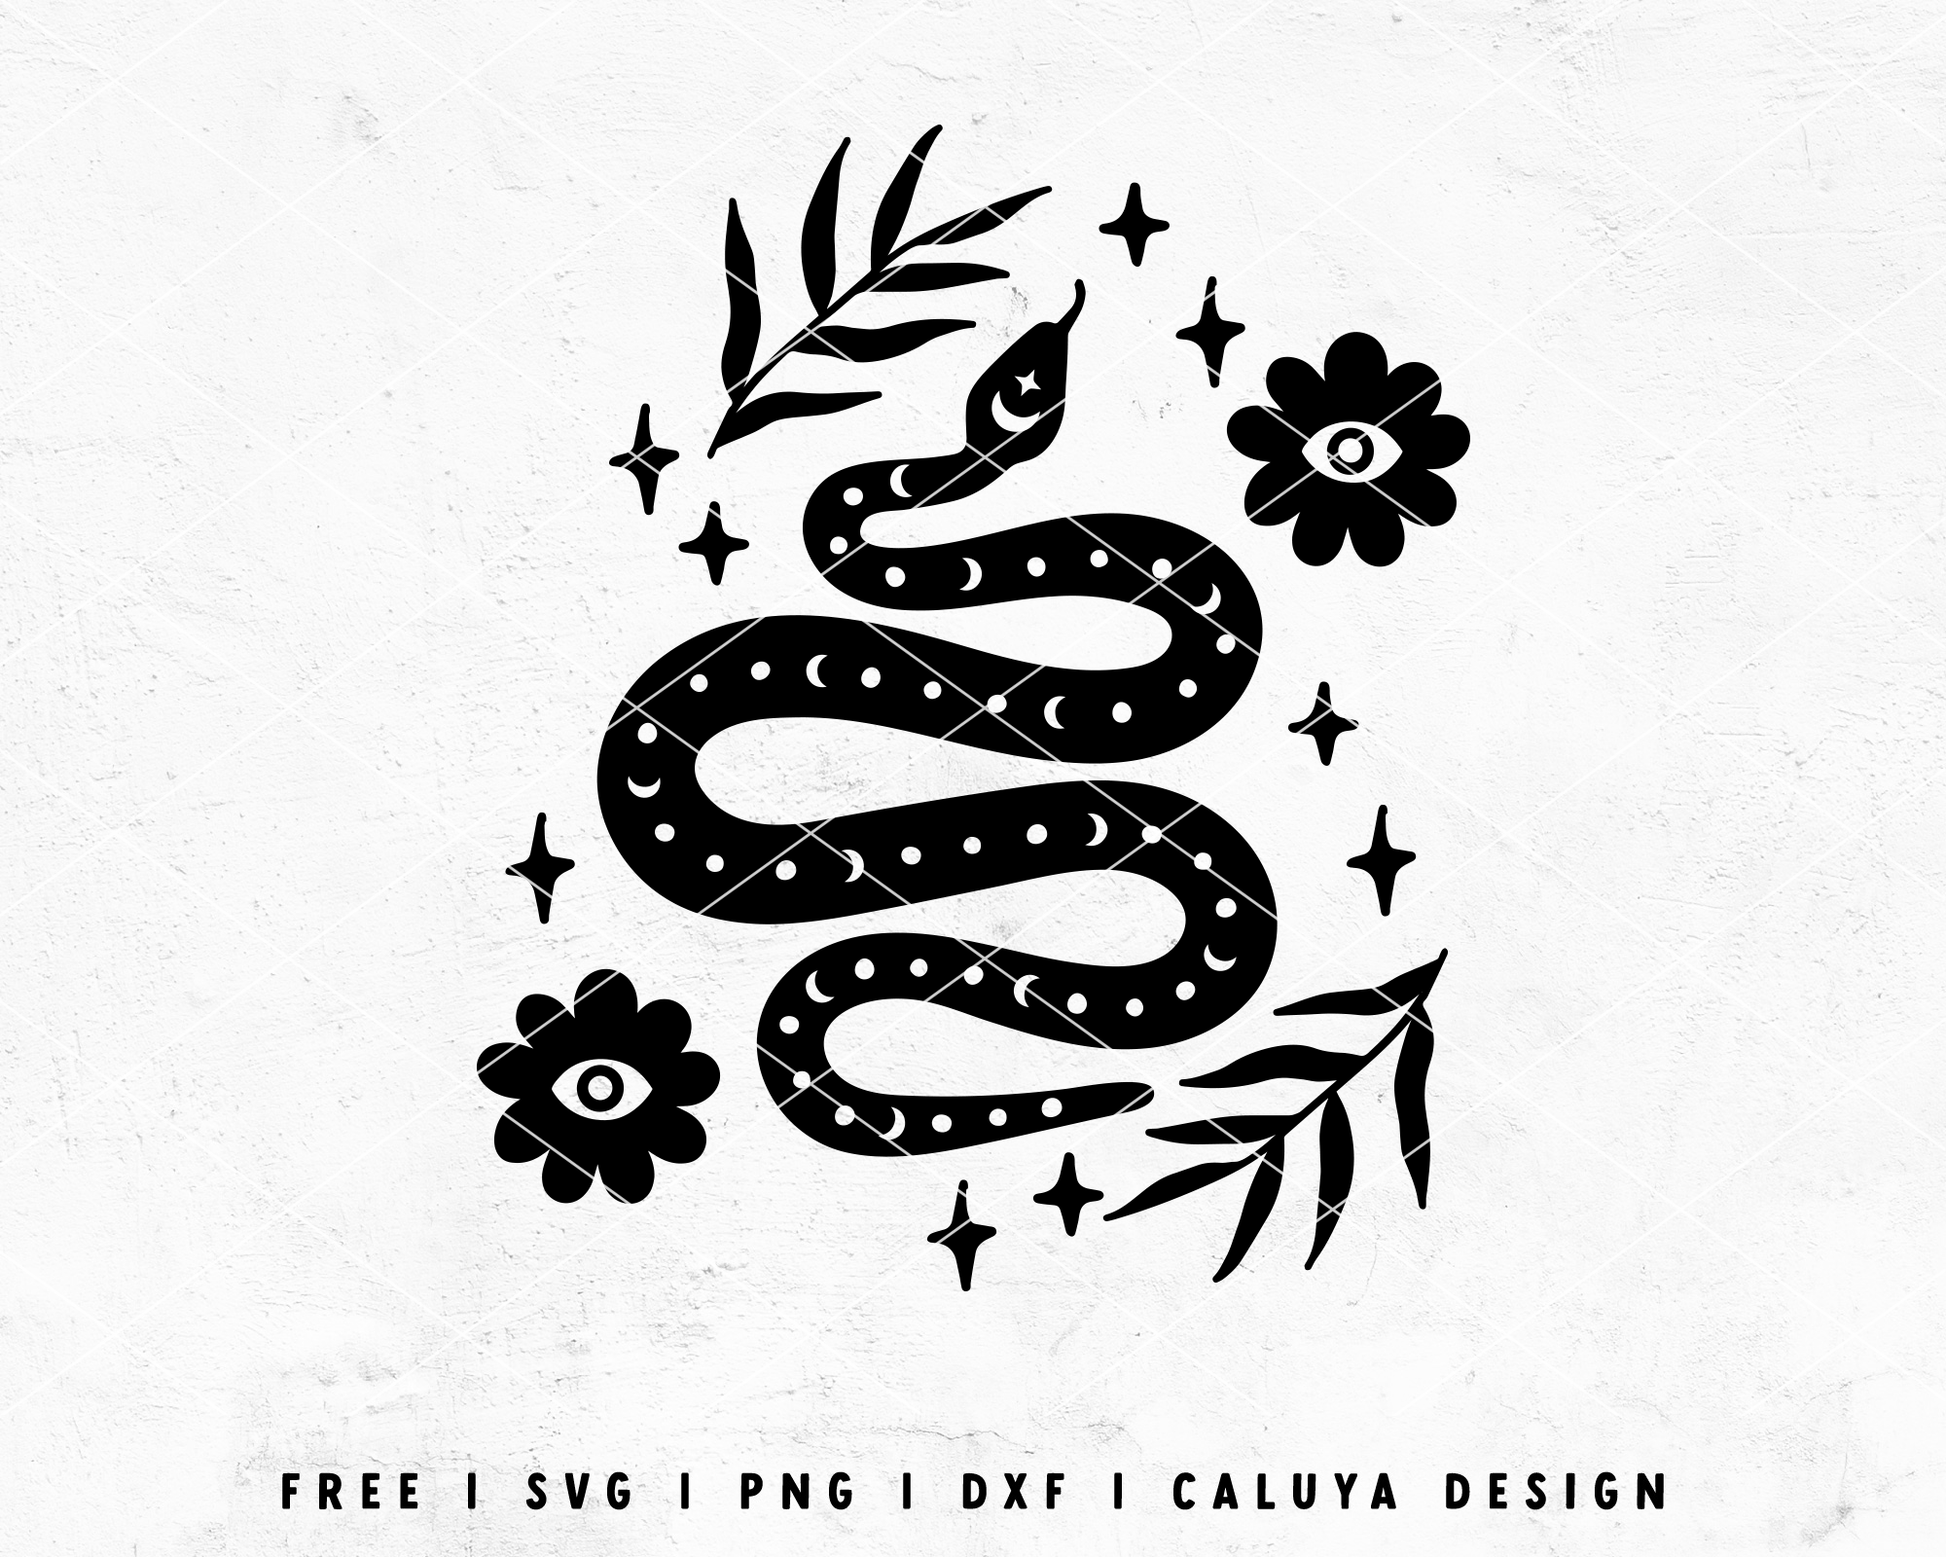 FREE Mystic Snake SVG | Mystic Witchy Design SVG Cut File for Cricut, Cameo Silhouette | Free SVG Cut File